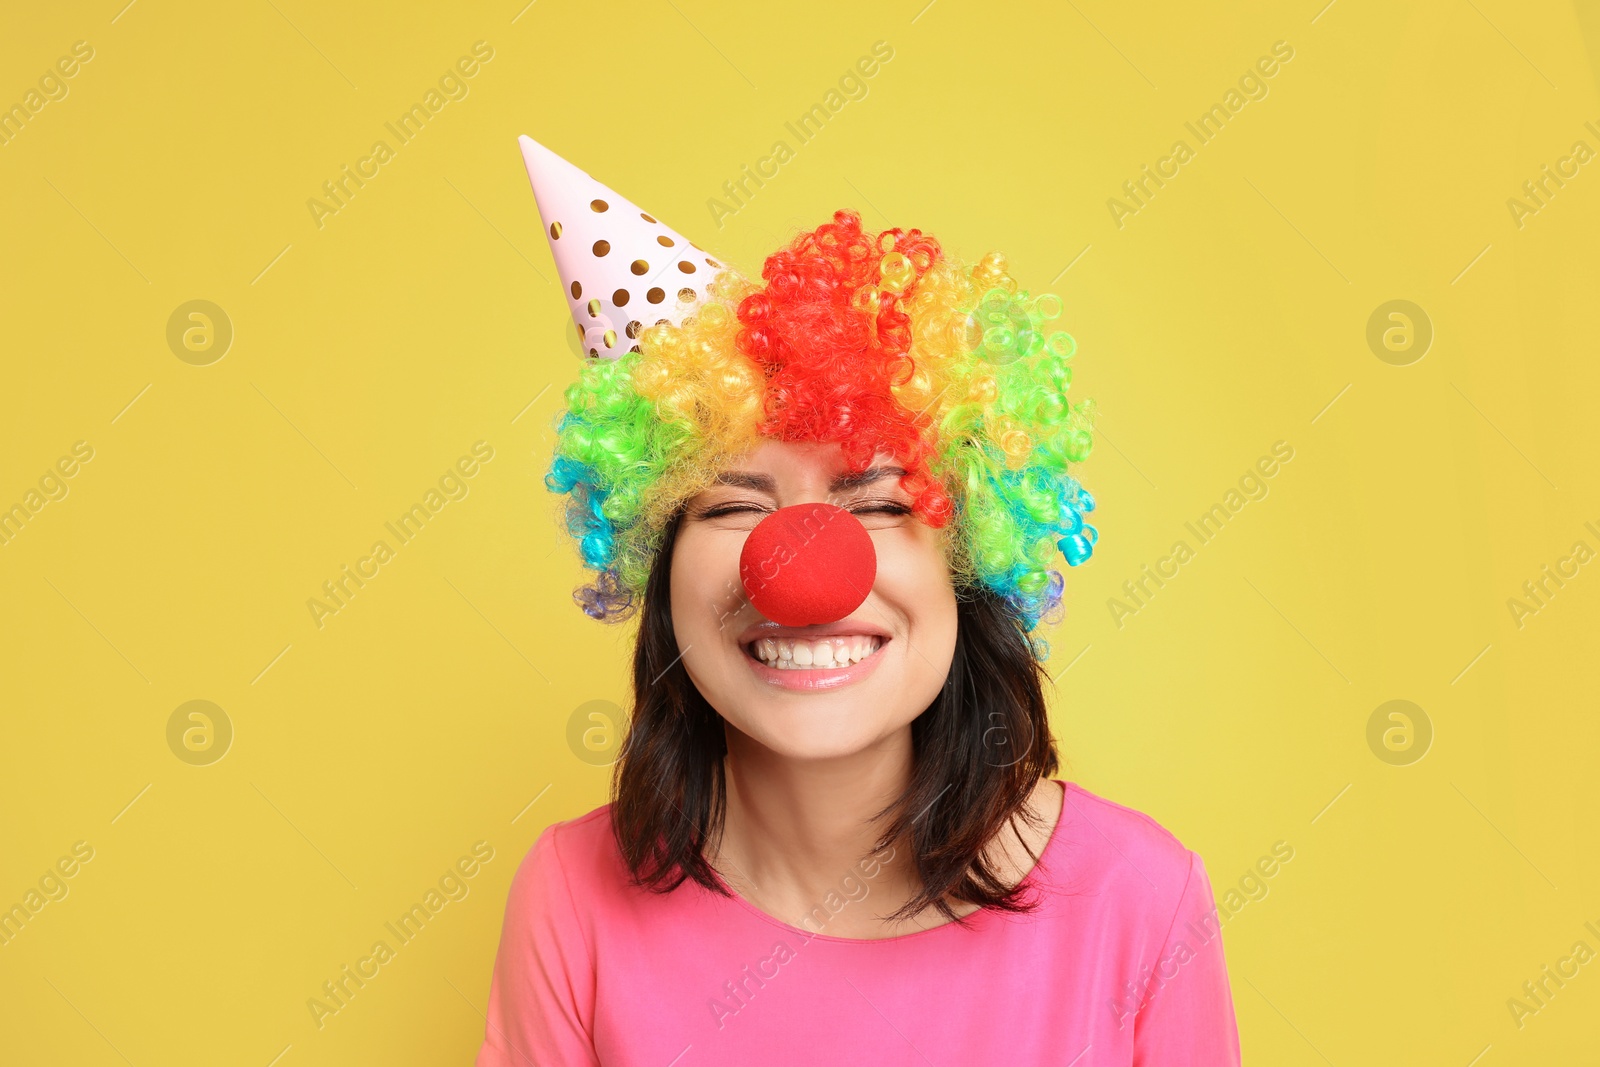 Photo of Joyful woman with rainbow wig, party hat and clown nose on yellow background. April fool's day